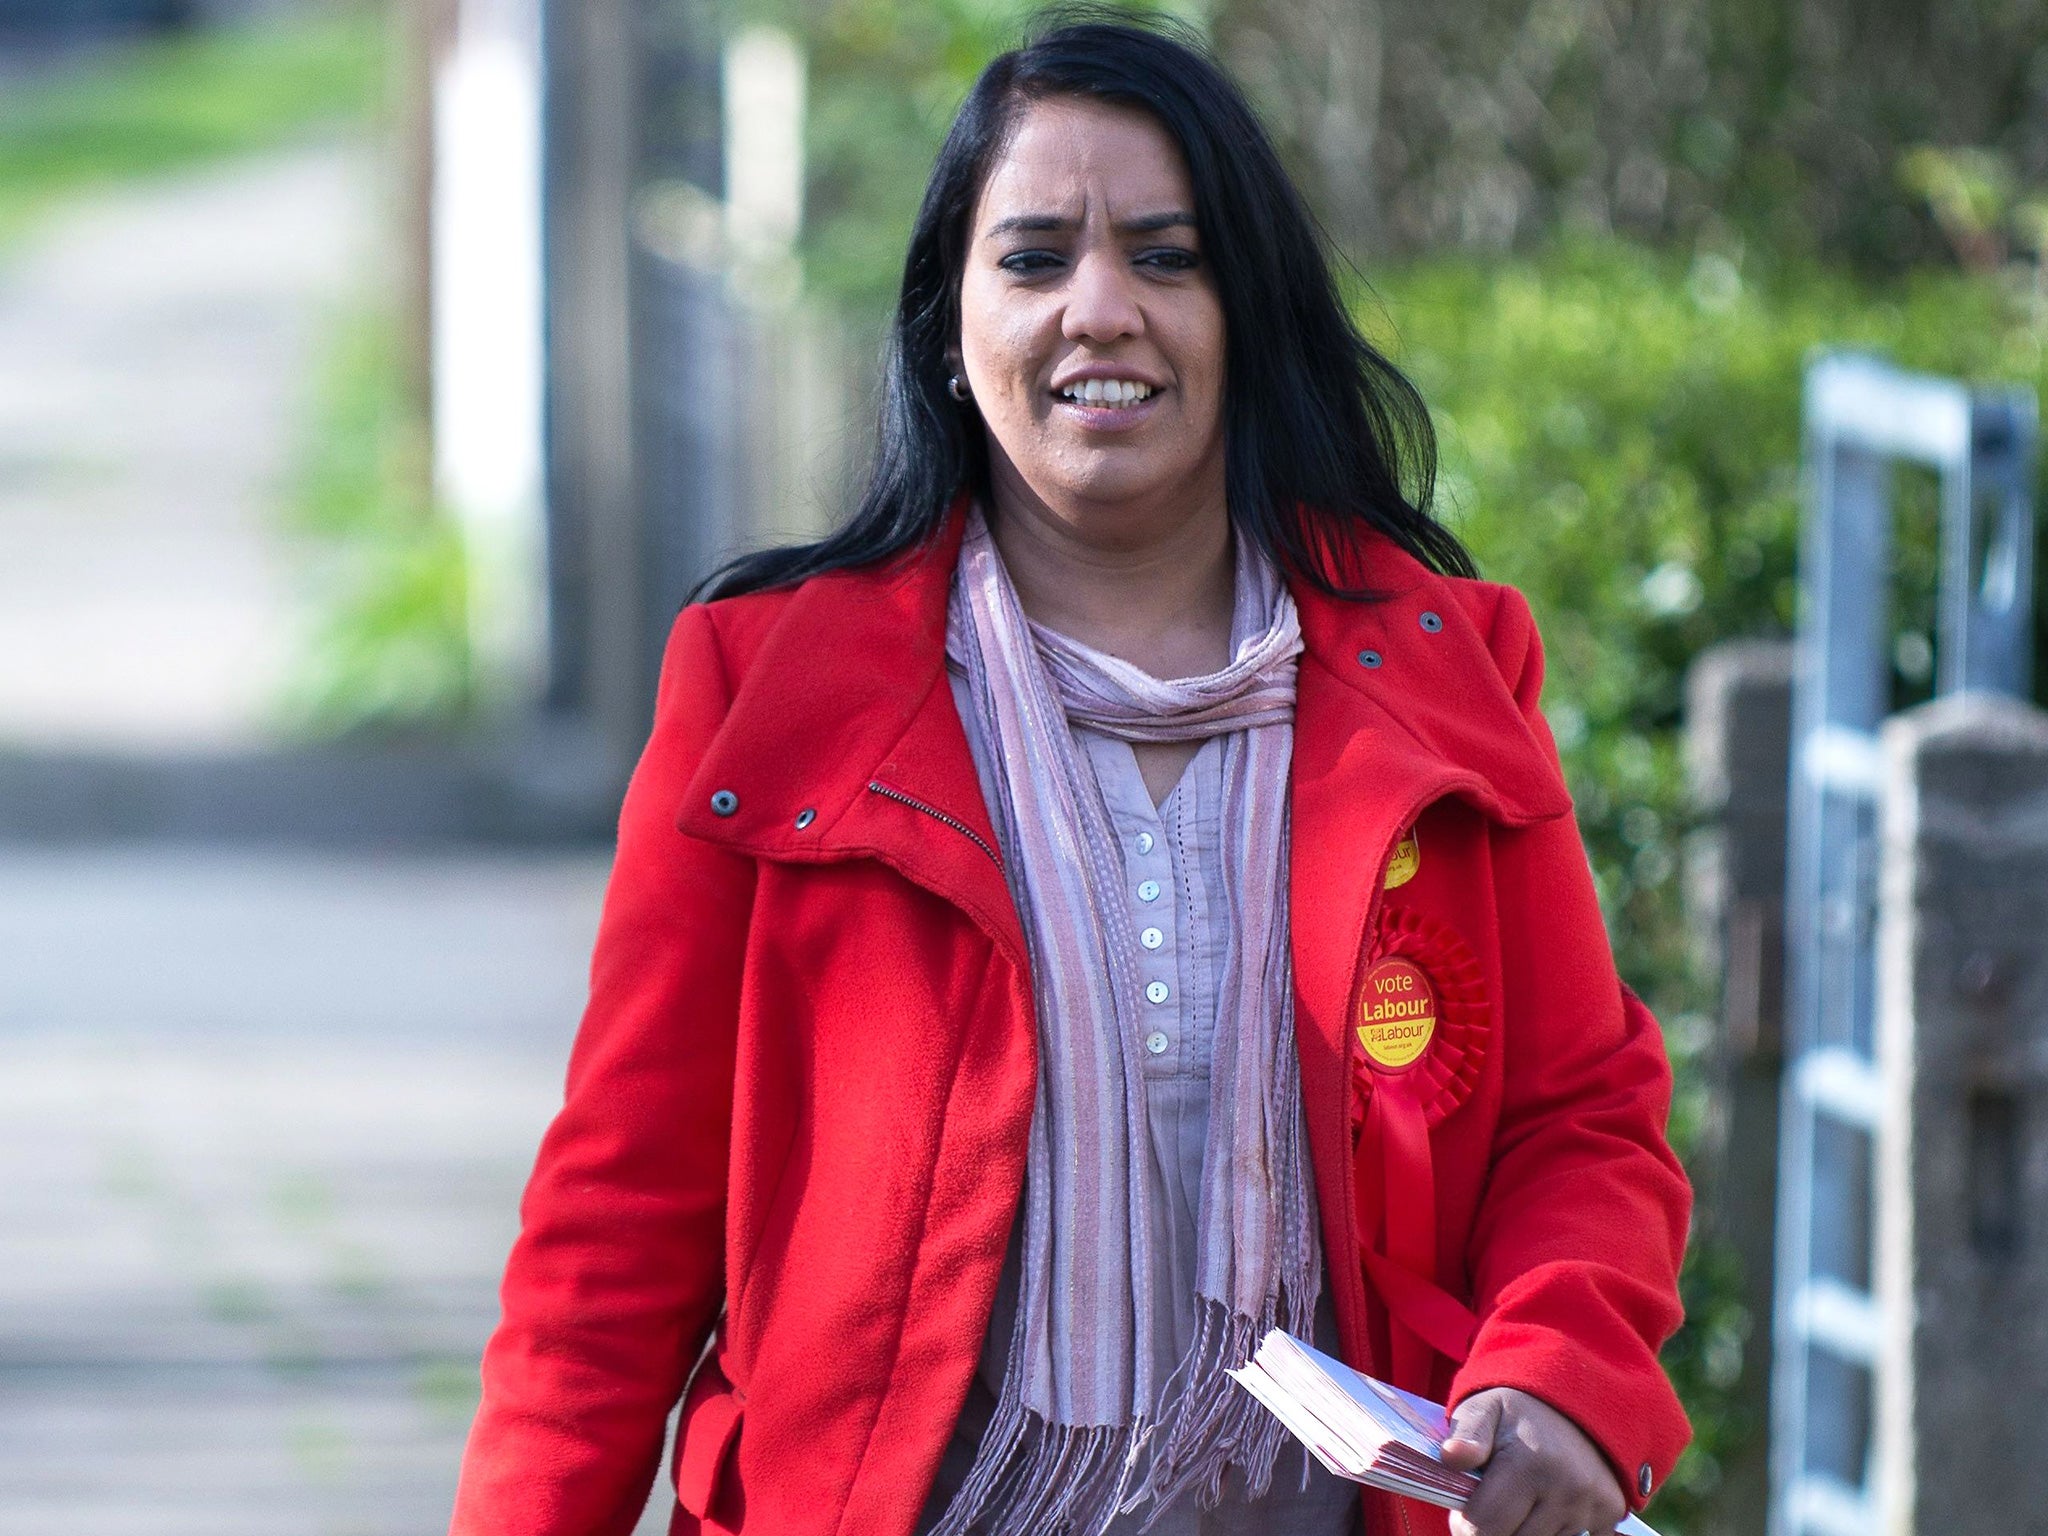 The Bradford native is one of only nine Labour Muslim MPs